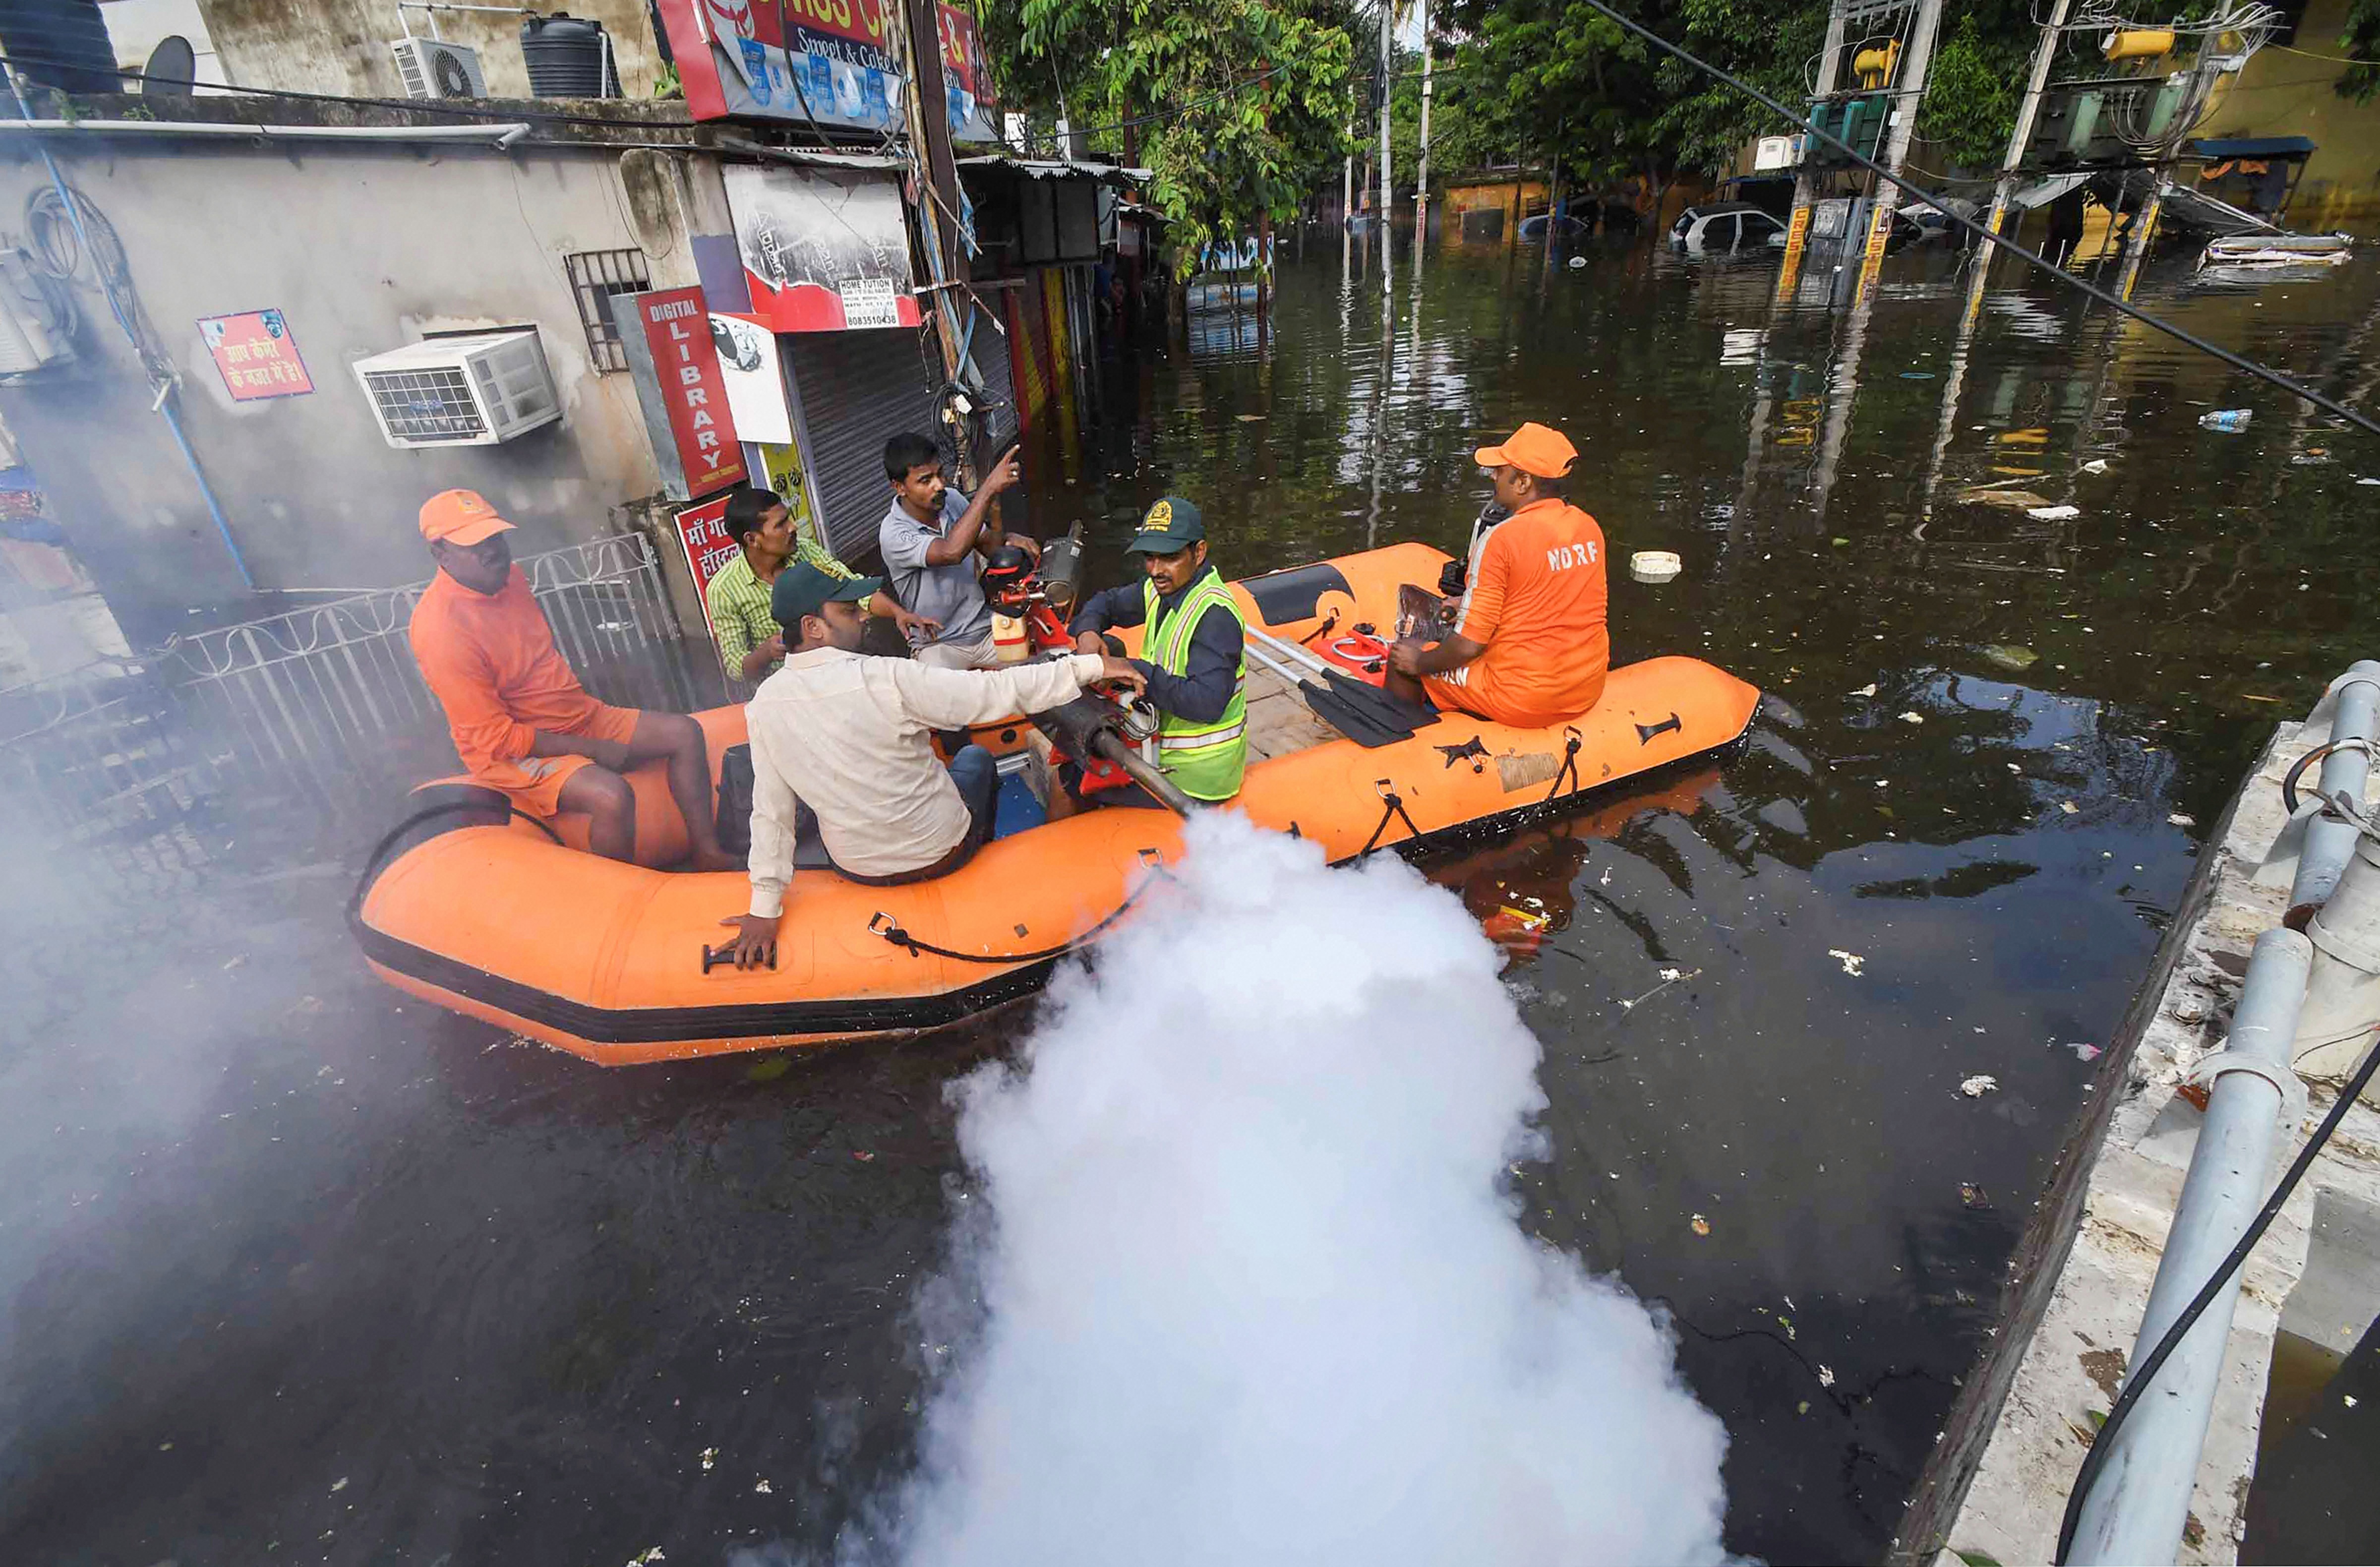 Patna Municipal Corporation (PMC) workers fumigate a flood-affected area as a precautionary measure against waterborne diseases following heavy monsoon rainfall - PTI